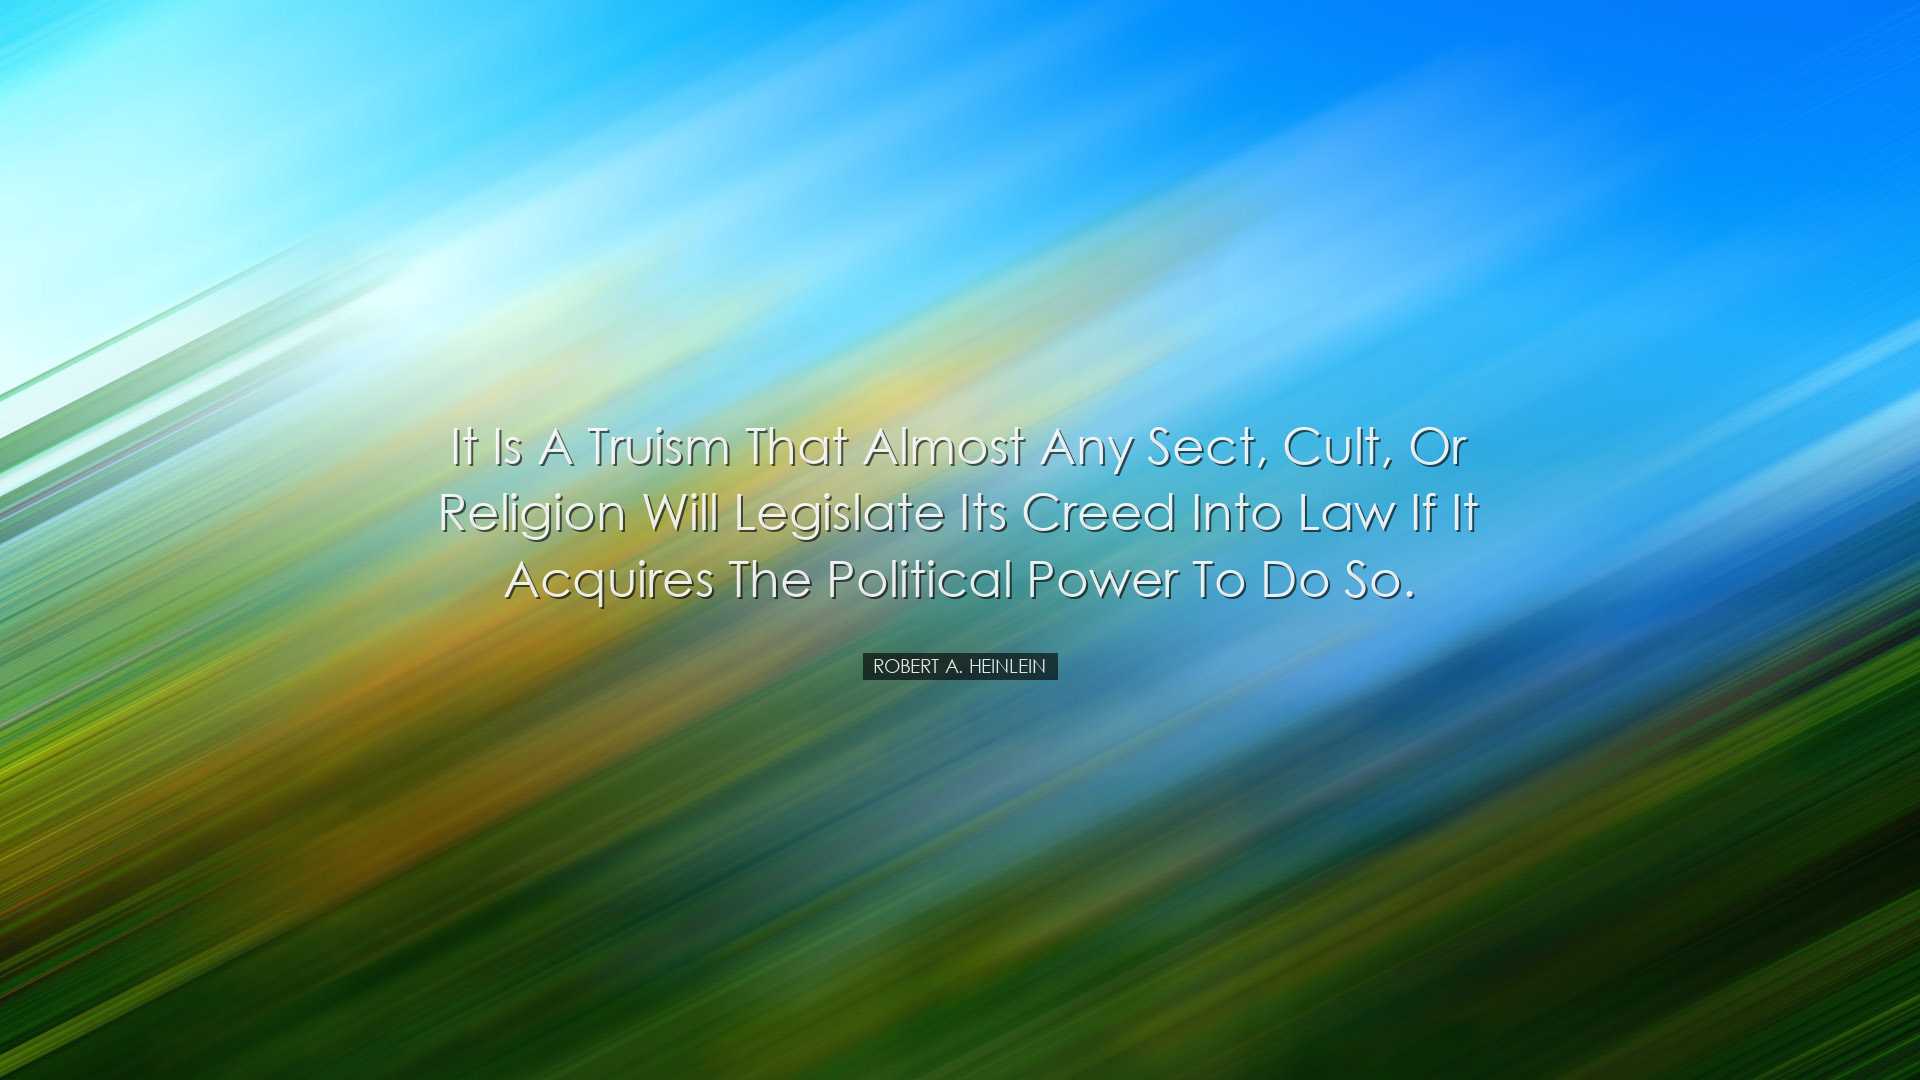 It is a truism that almost any sect, cult, or religion will legisl